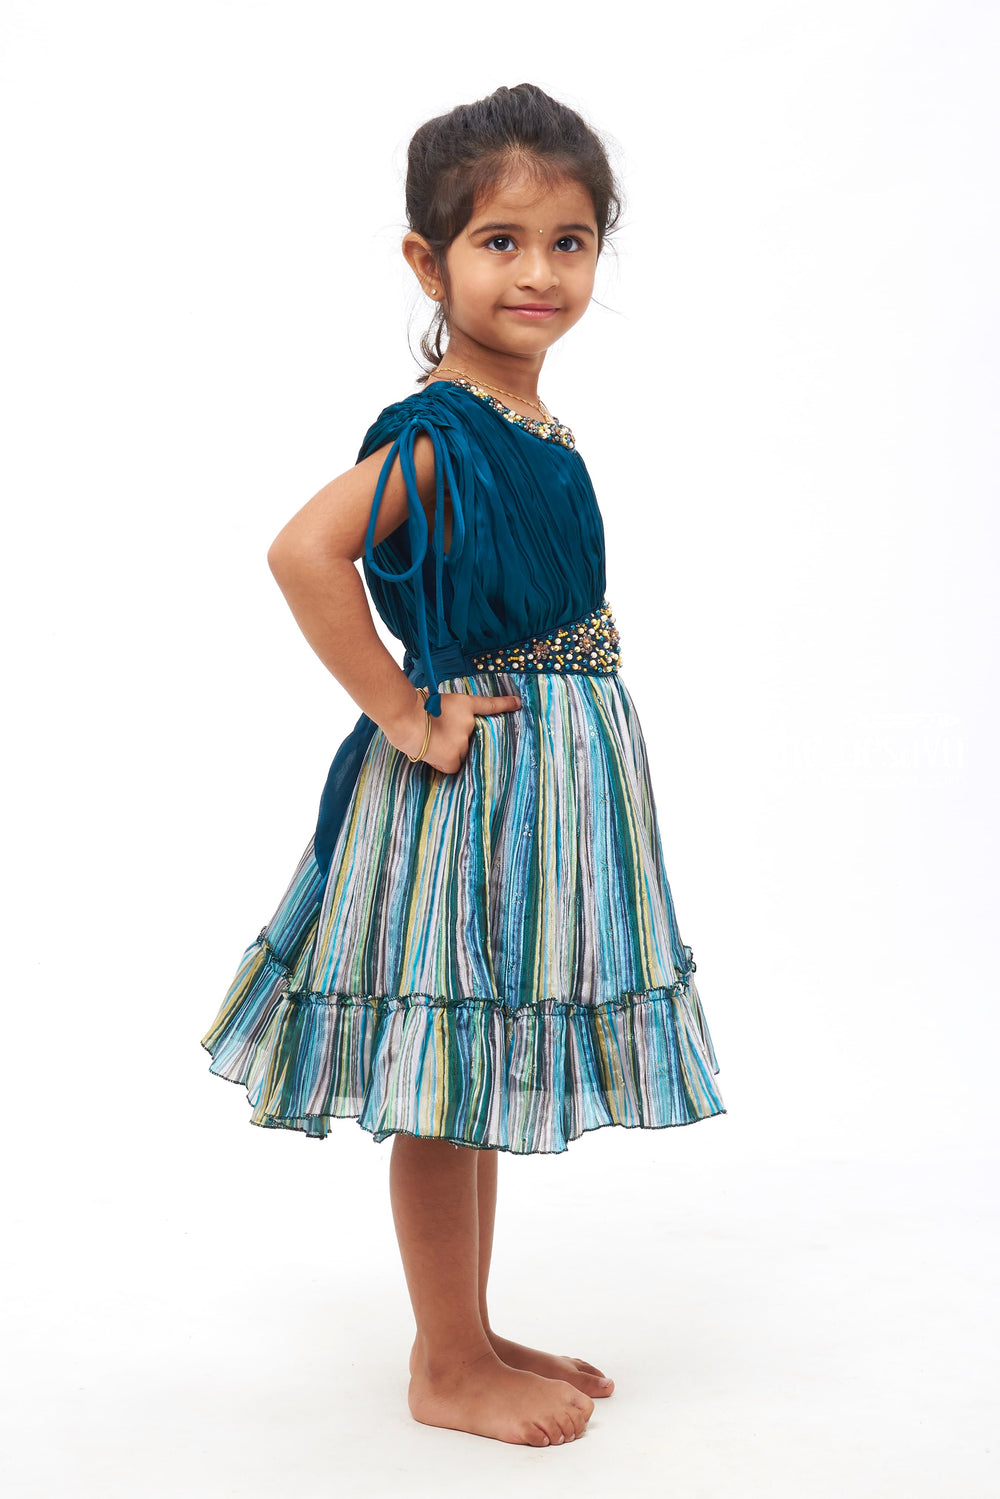 The Nesavu Girls Fancy Party Frock Pearl & Bead Embroidered with Multicolor Striped Patry Frock - Elegant Party Dress for Girls Nesavu Pearl & Bead Embellished Party Frock | Elegant Party Dresses for Little Girls | The Nesavu